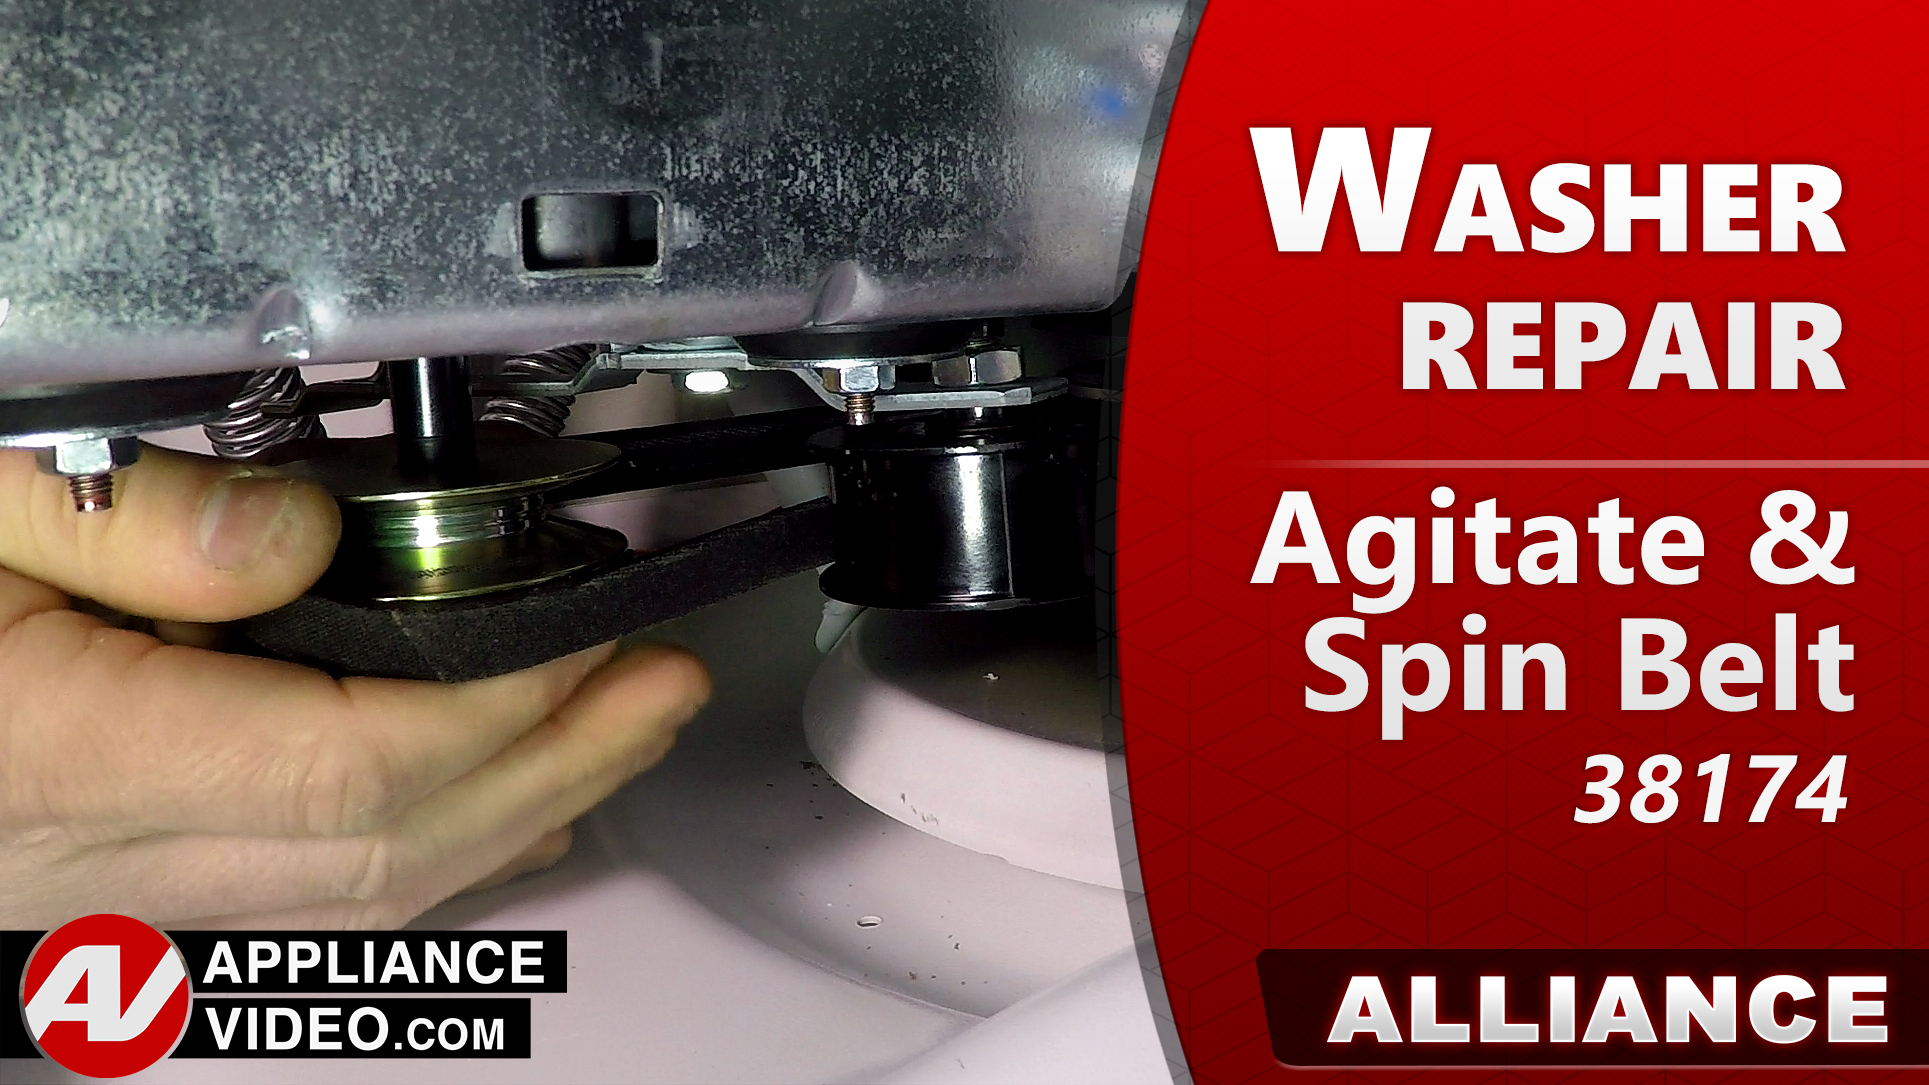 Speed Queen – Alliance AWN632SP116TW01 Washer – Not going through spin – Agitate and Spin Belt